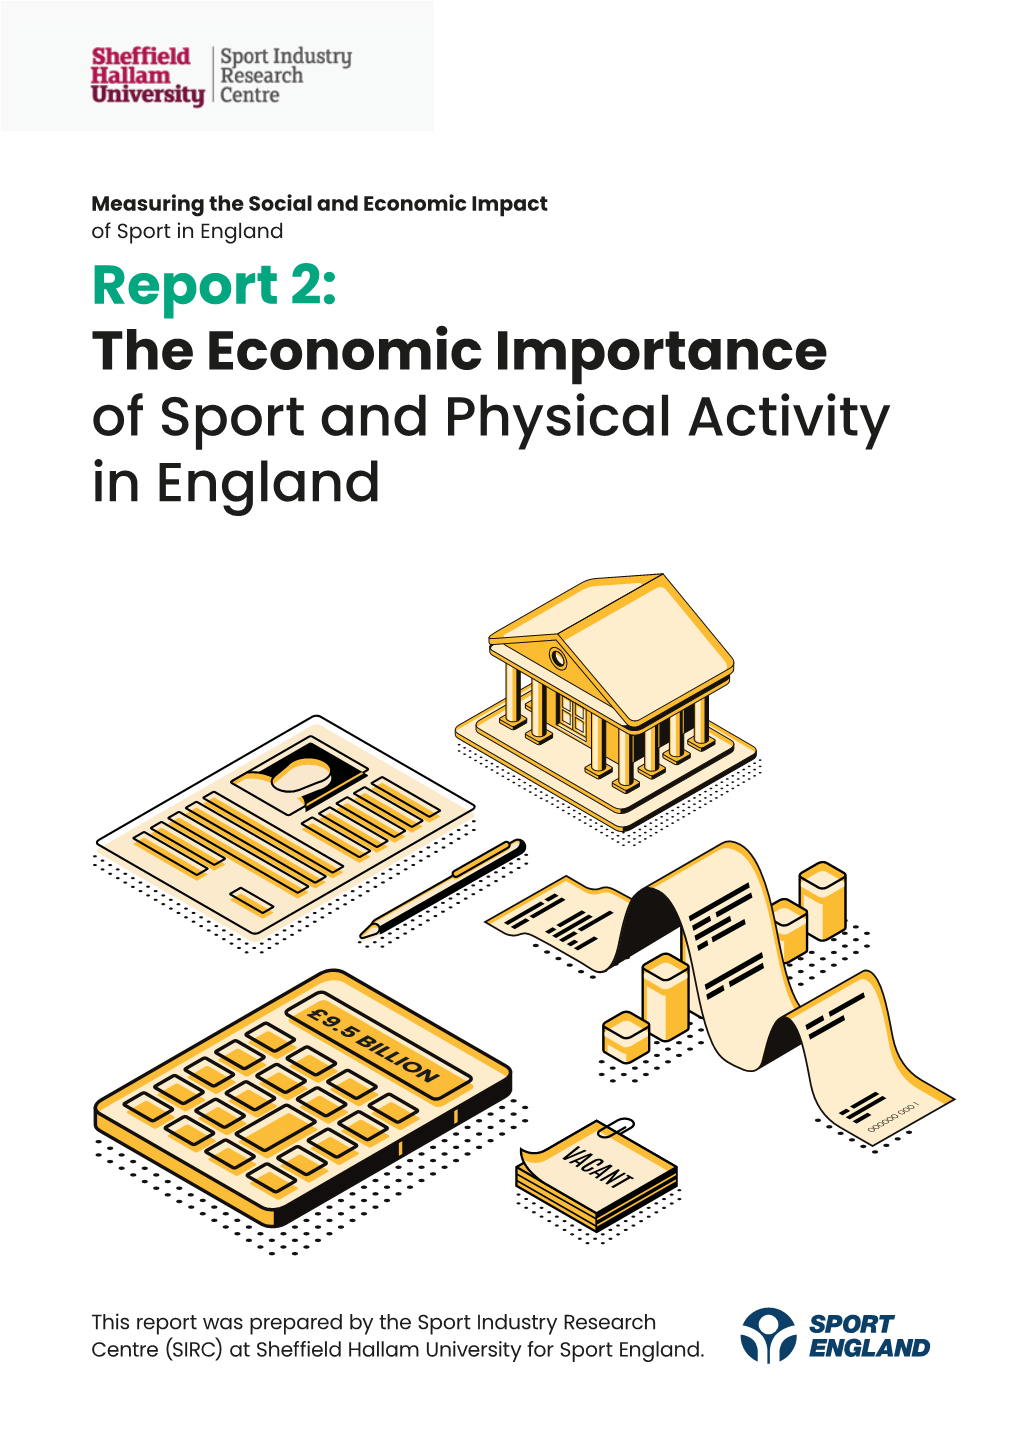 Report 2: the Economic Importance of Sport and Physical Activity in England